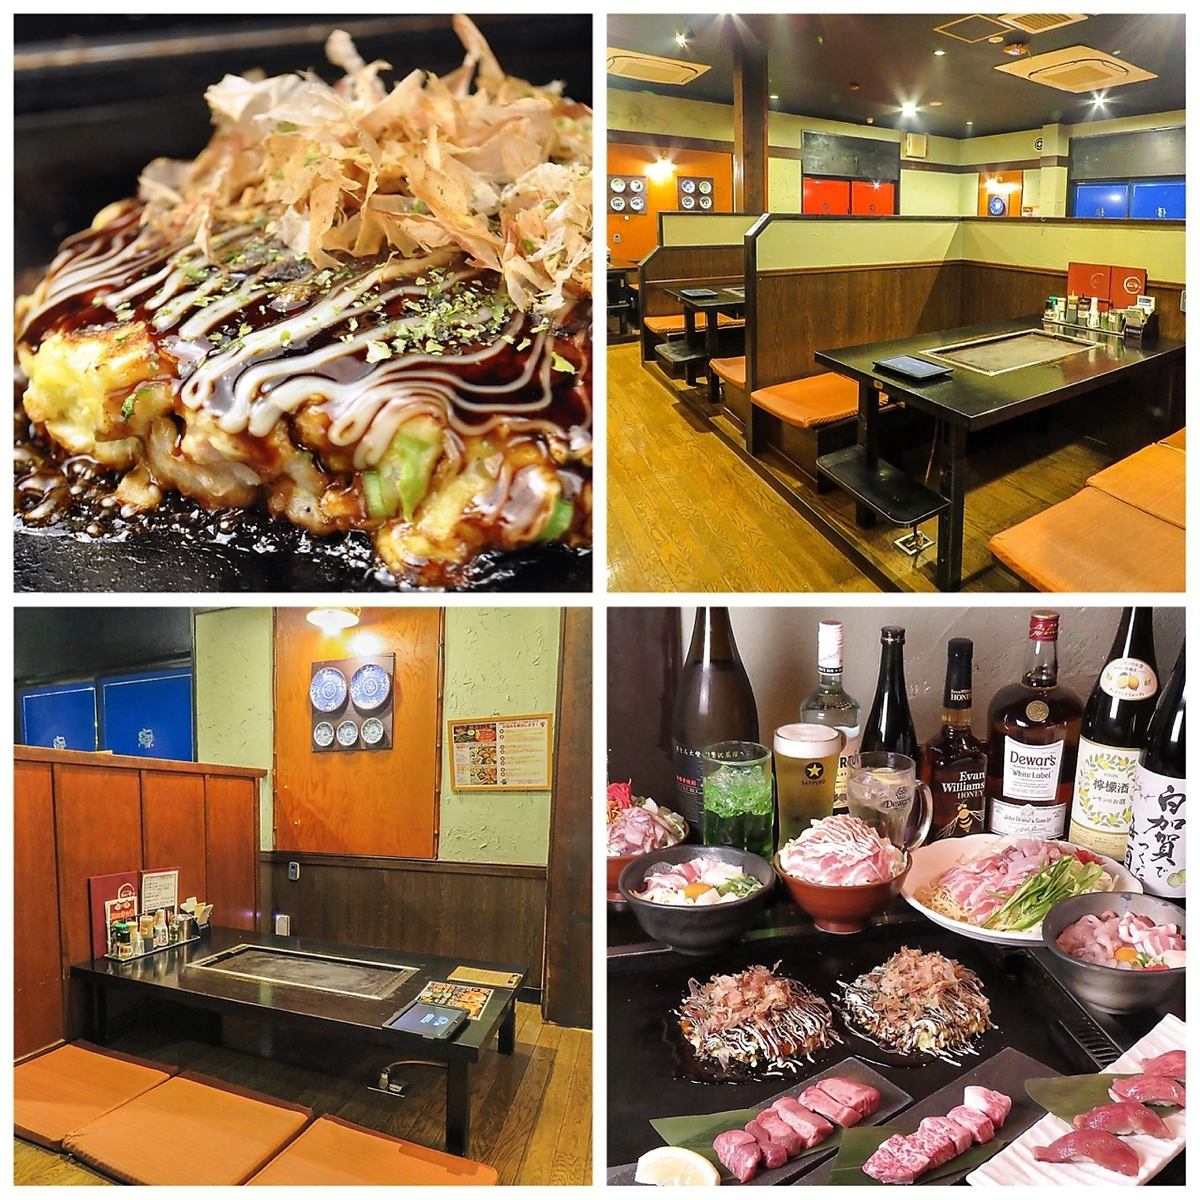 ◆ If you want to eat delicious okonomiyaki & monja, here! ◆ From small groups to large banquets ◎